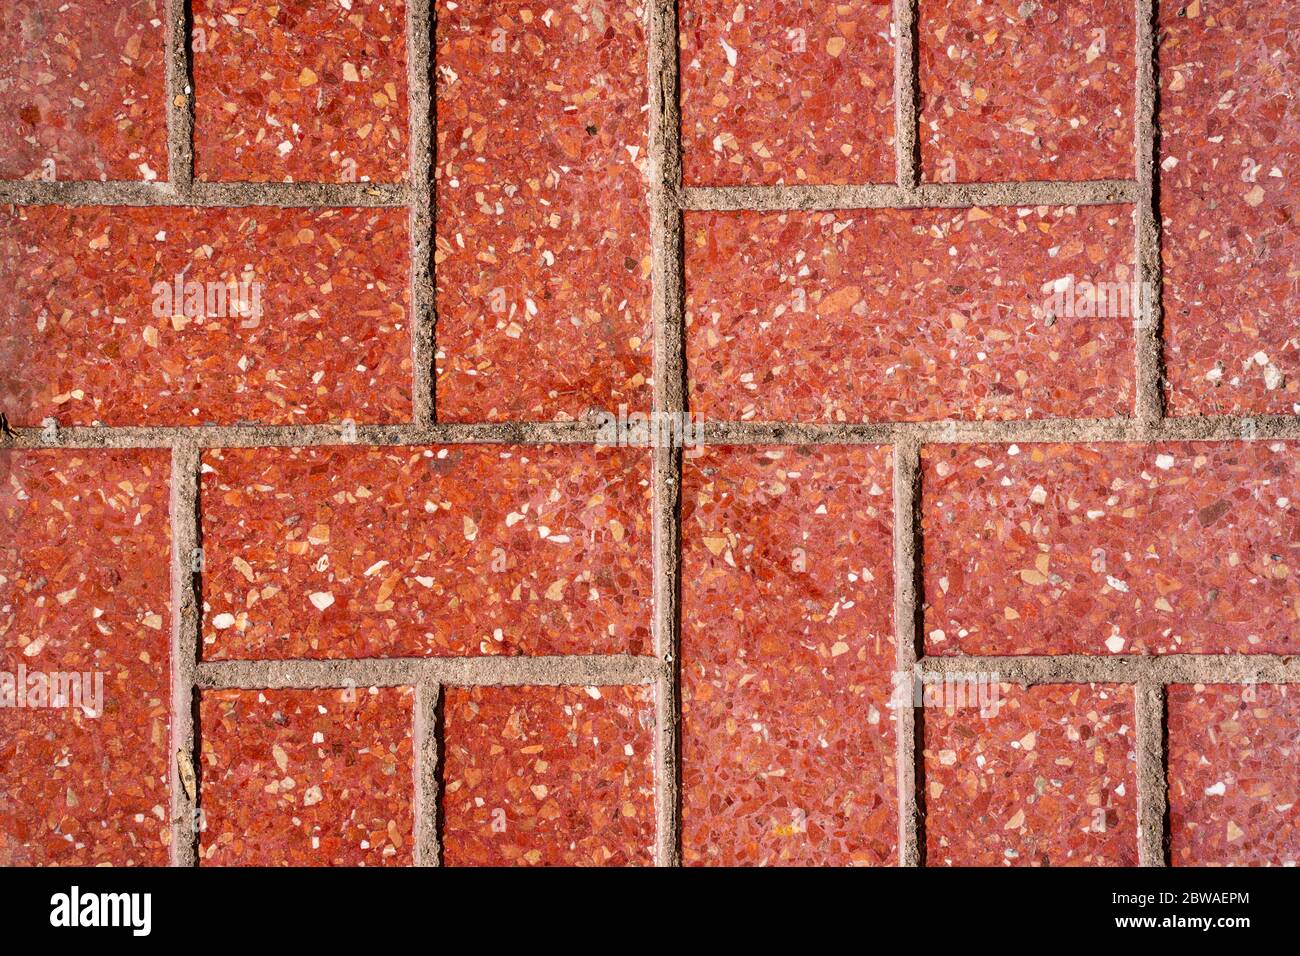 Red squared tiles. Seamless texture. Top view. Stock Photo